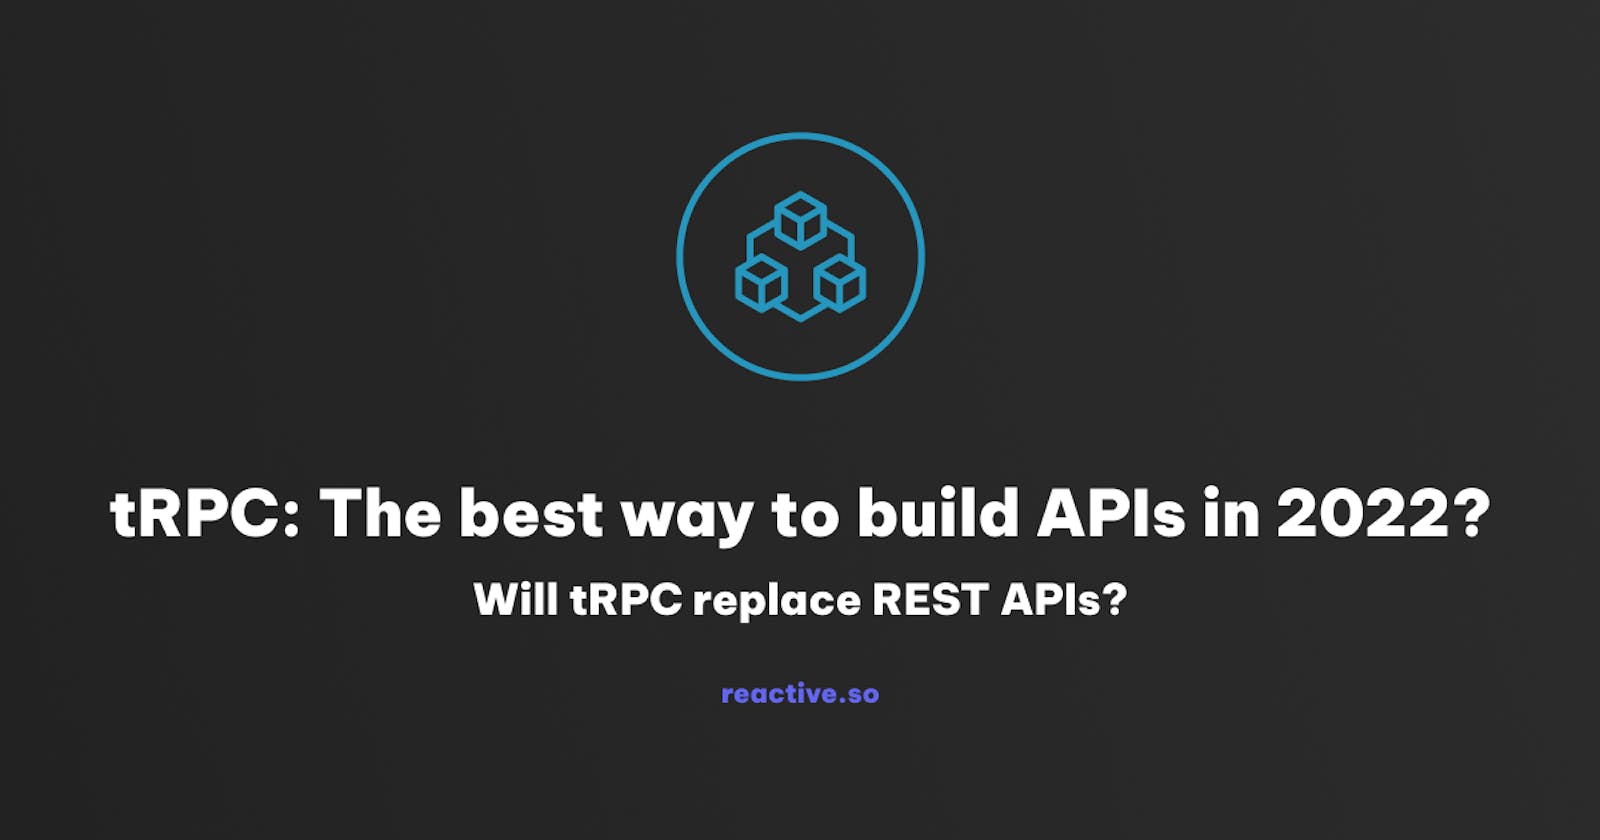 tRPC: The best way to build APIs in 2022?